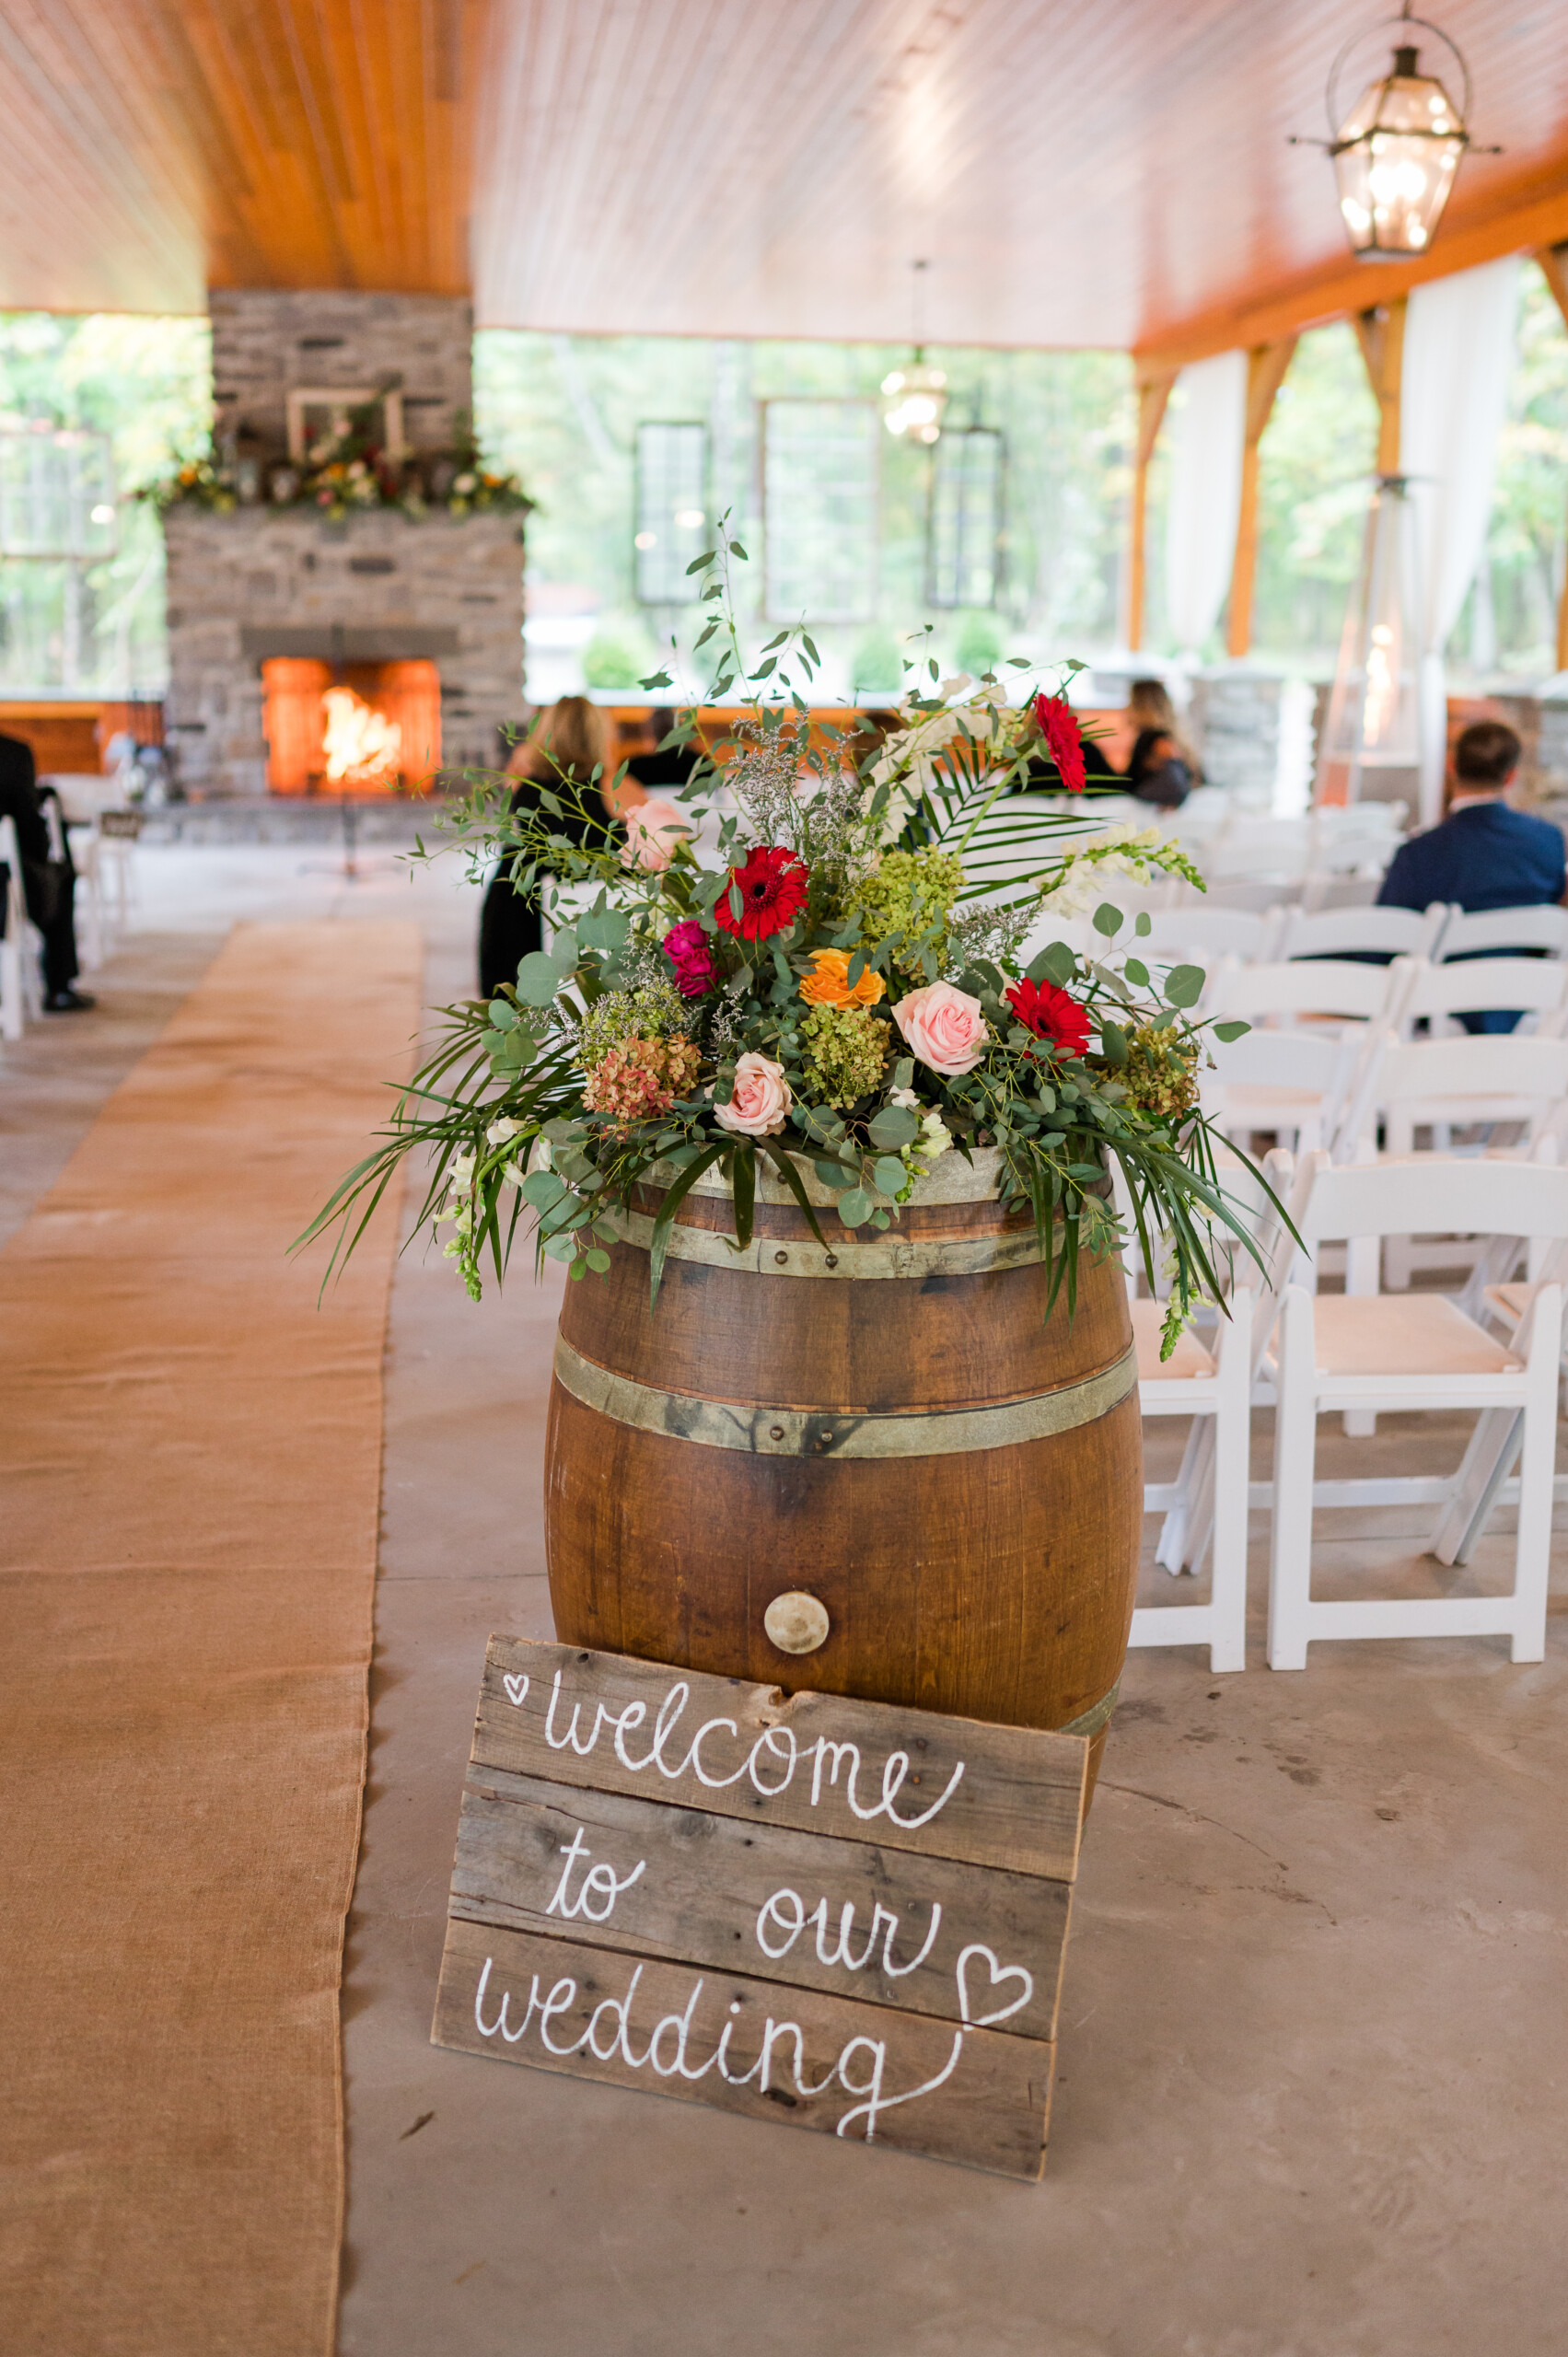 Wooden barrel decorated in pavilion